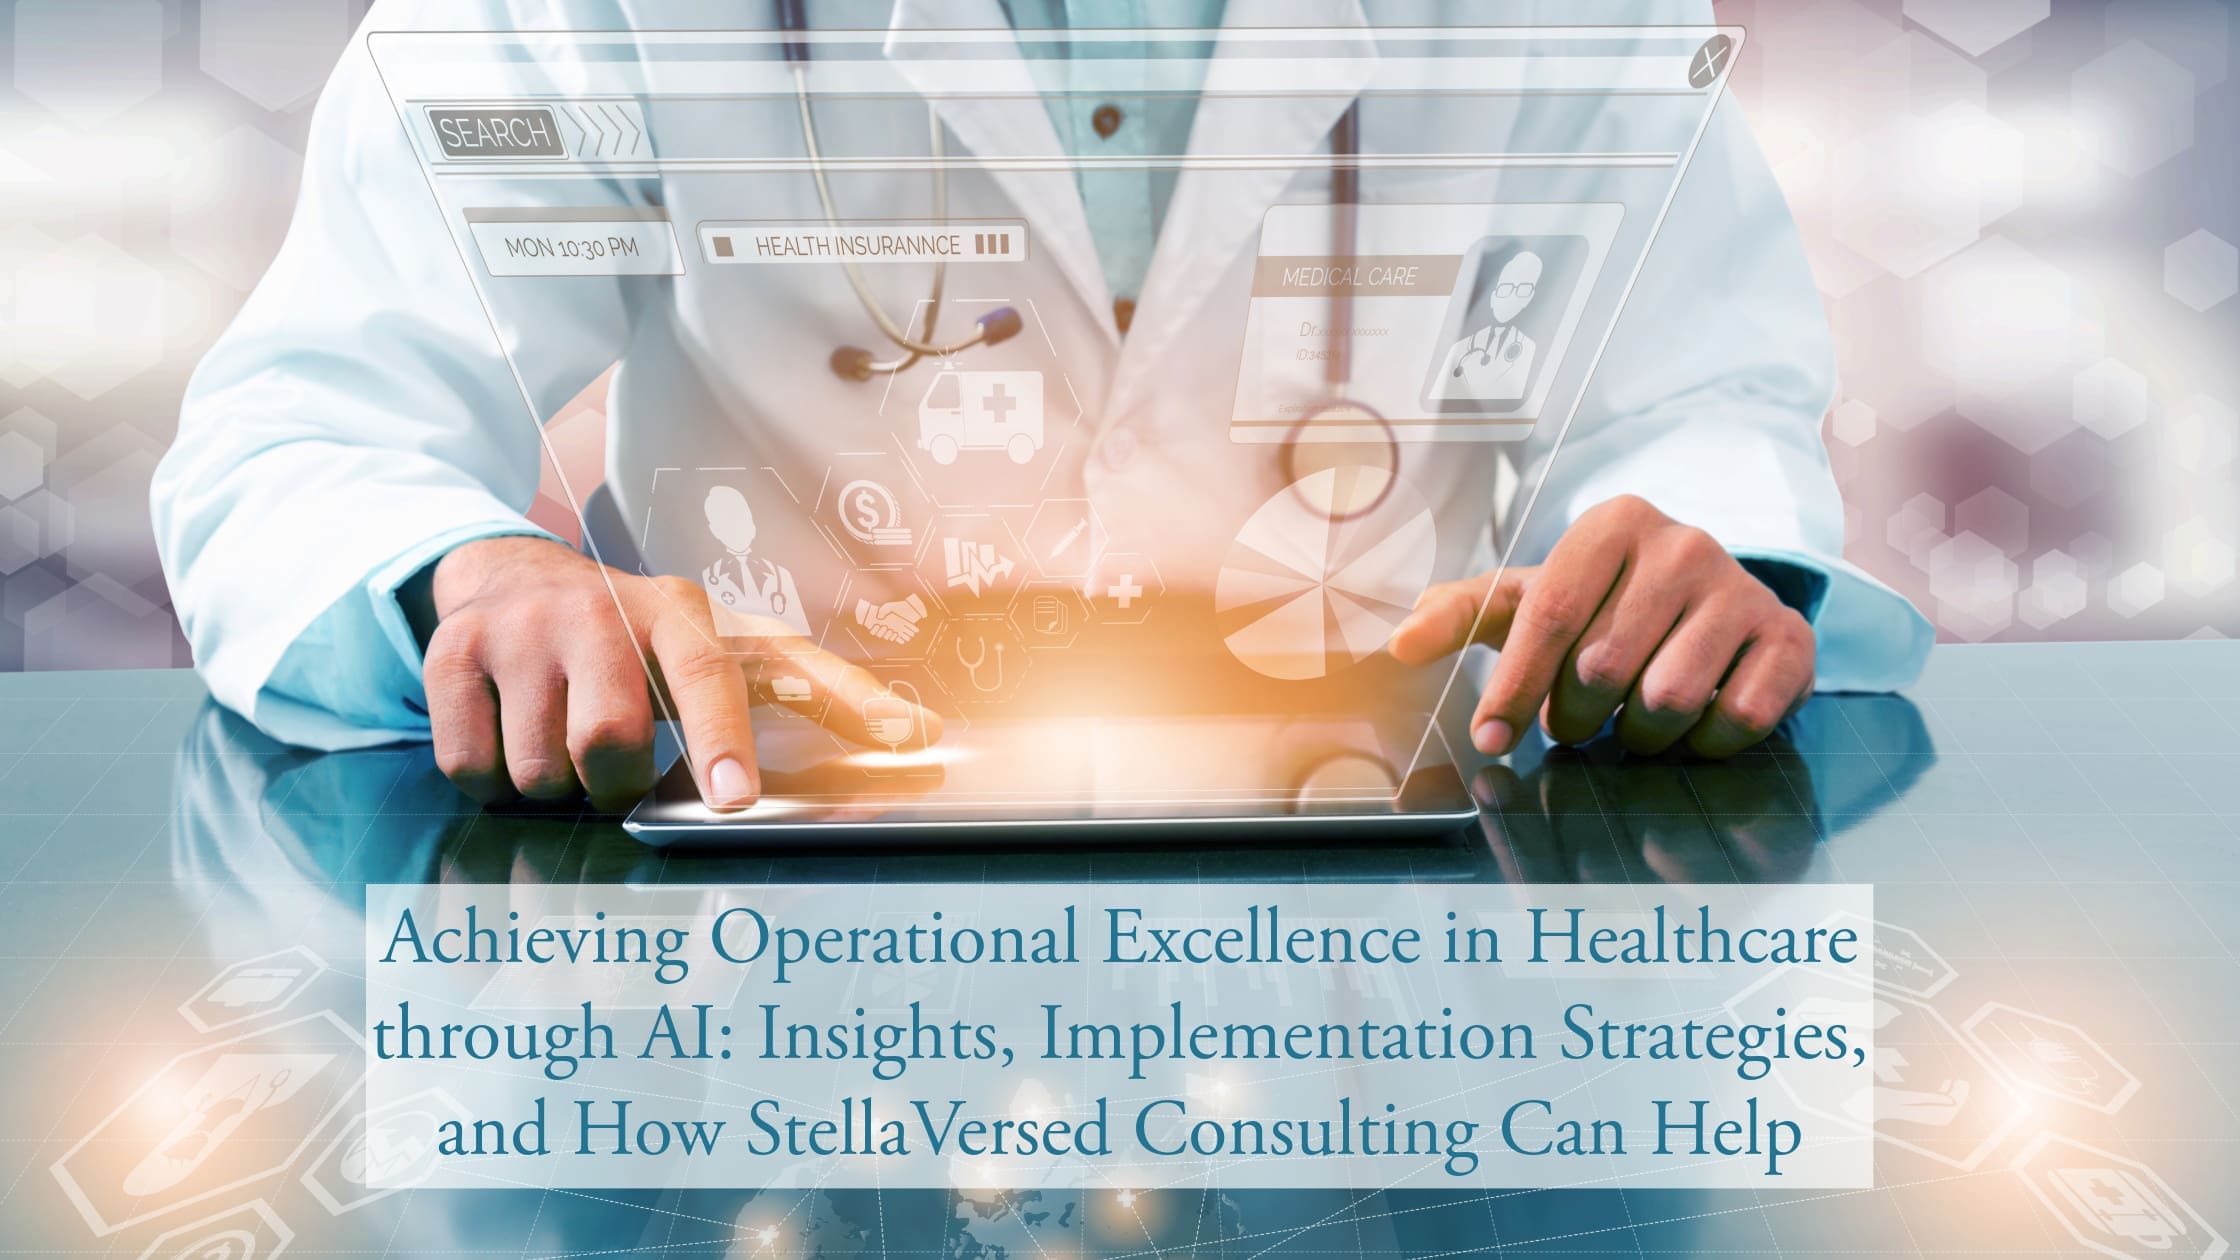 Featured image for “ Achieving Operational Excellence in Healthcare through AI: Insights, Implementation Strategies, and How StellaVersed Consulting Can Help”